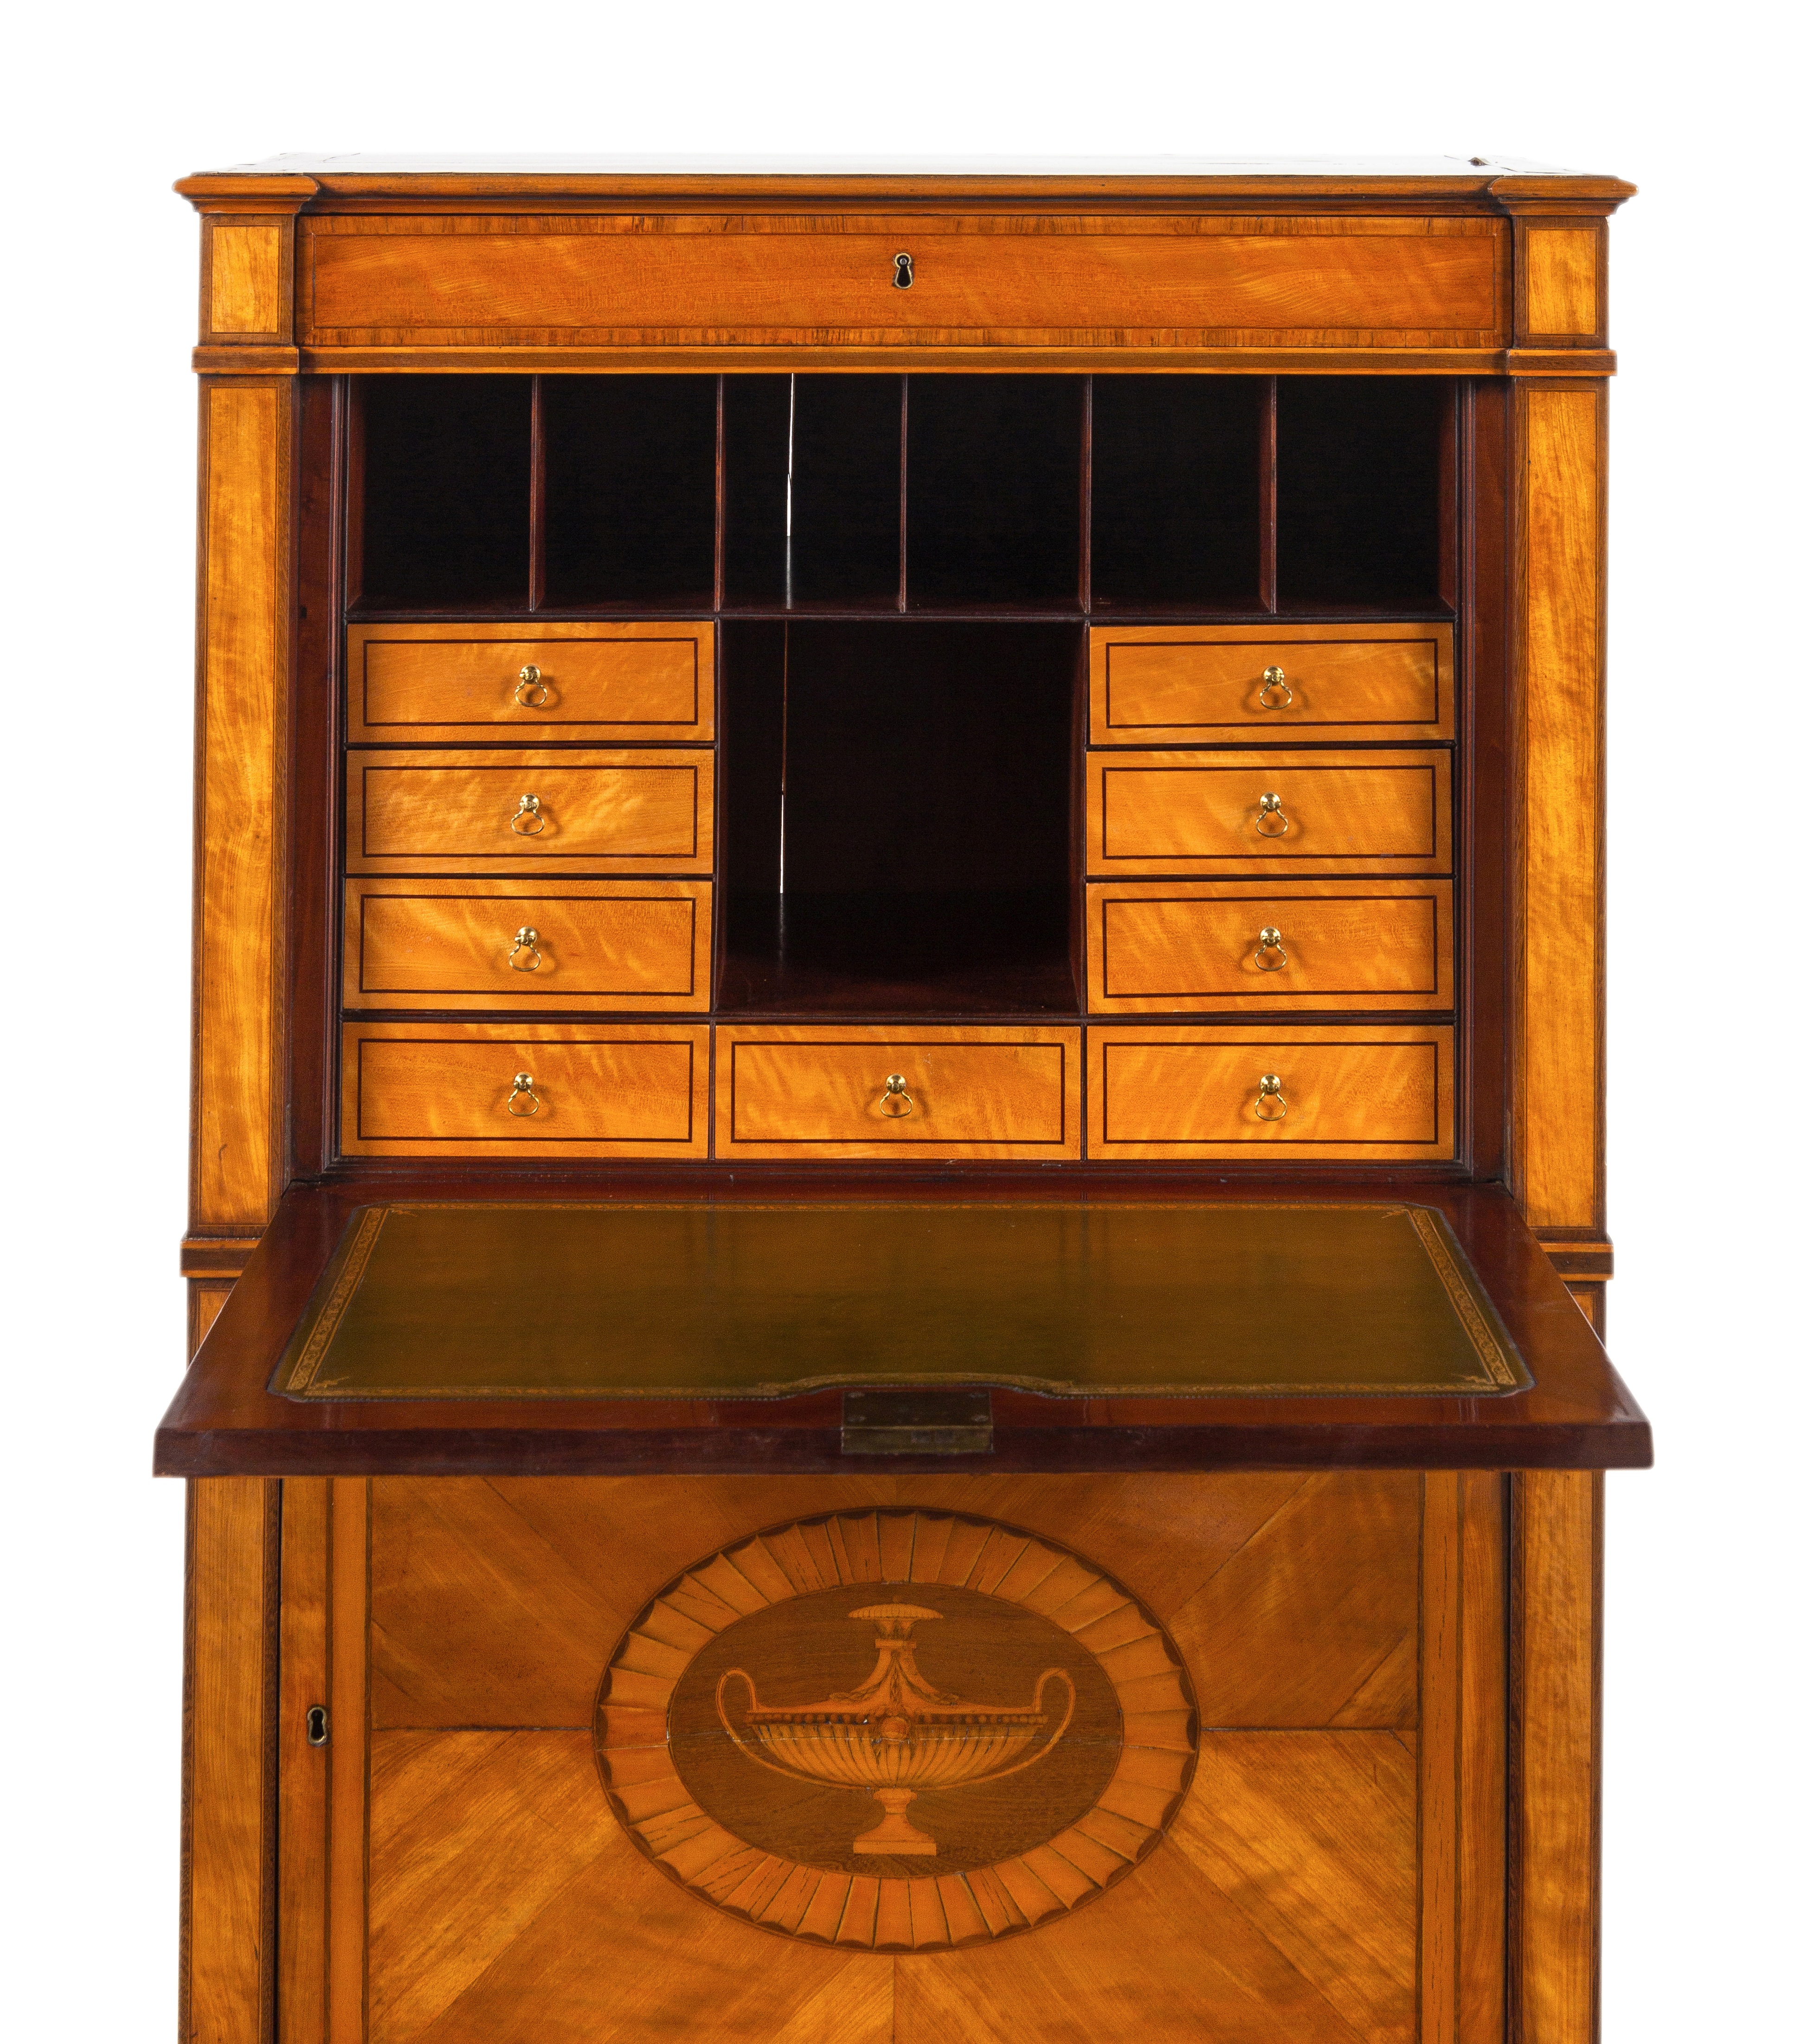 A George III Satinwood, Tulipwood and Amaranth Marquetry Fall-Front Secretaire - Image 5 of 11